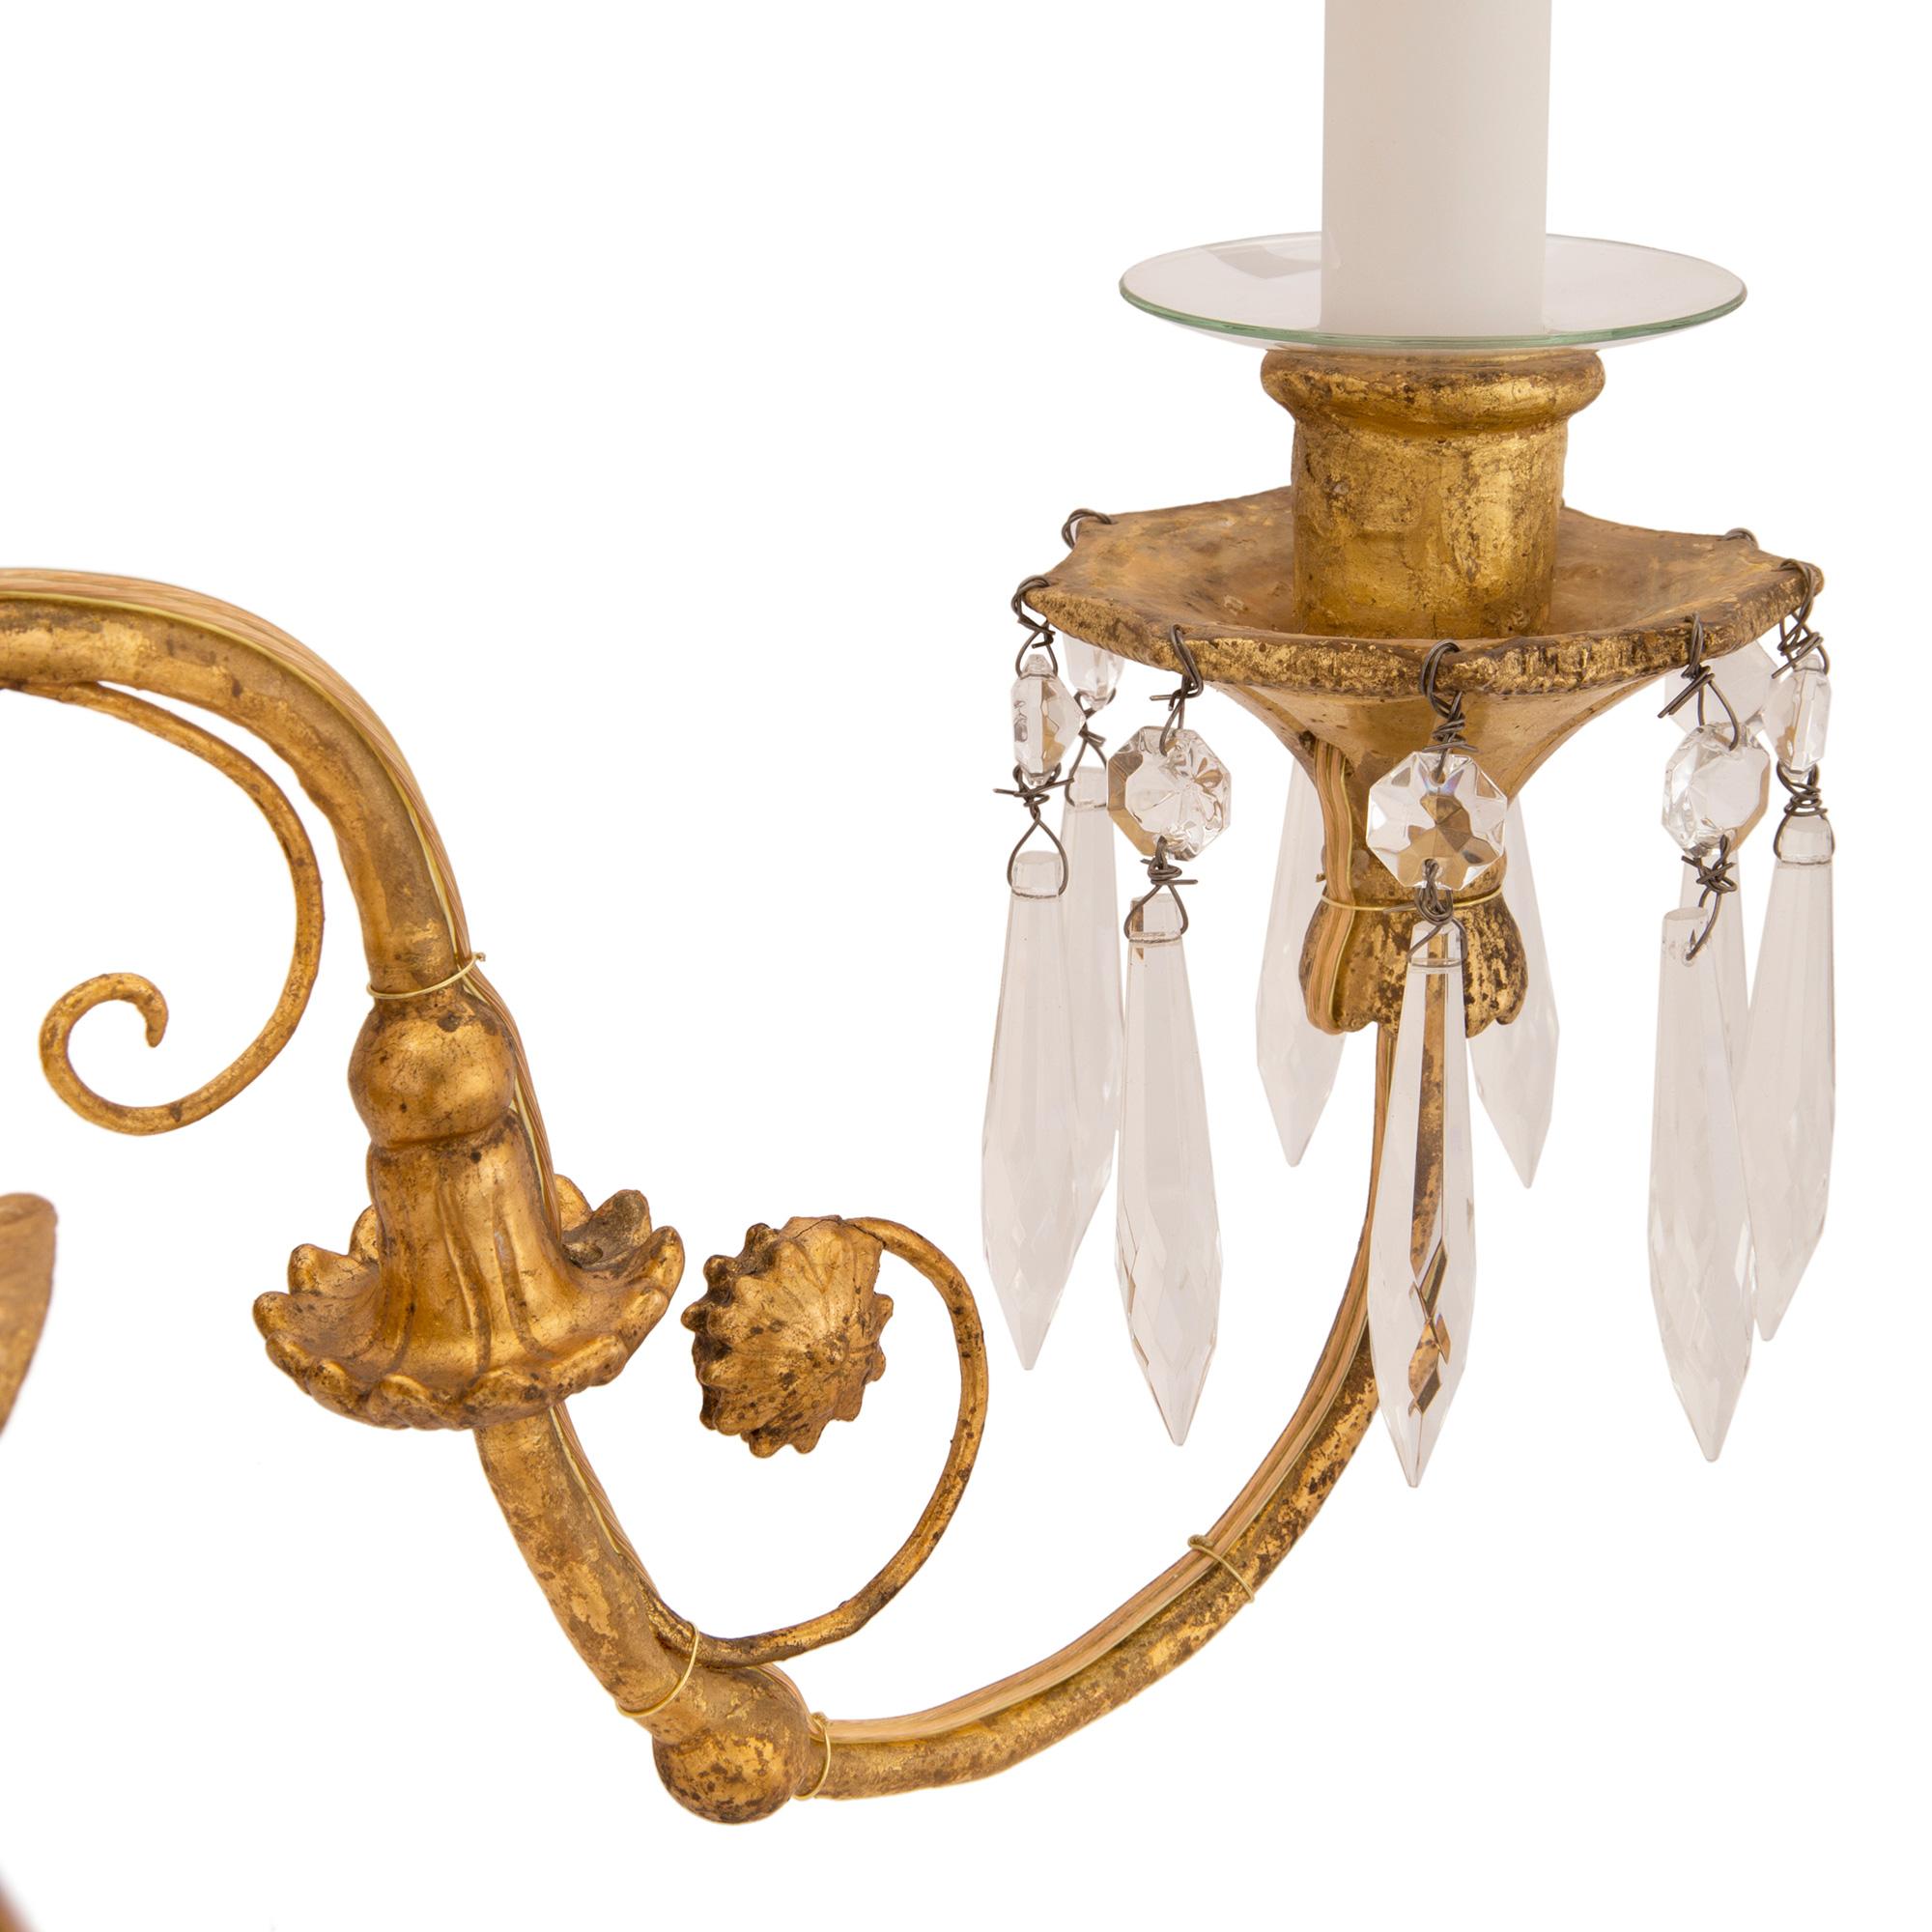 Italian 19th Century Neoclassical Style Giltwood and Ormolu Chandelier For Sale 2